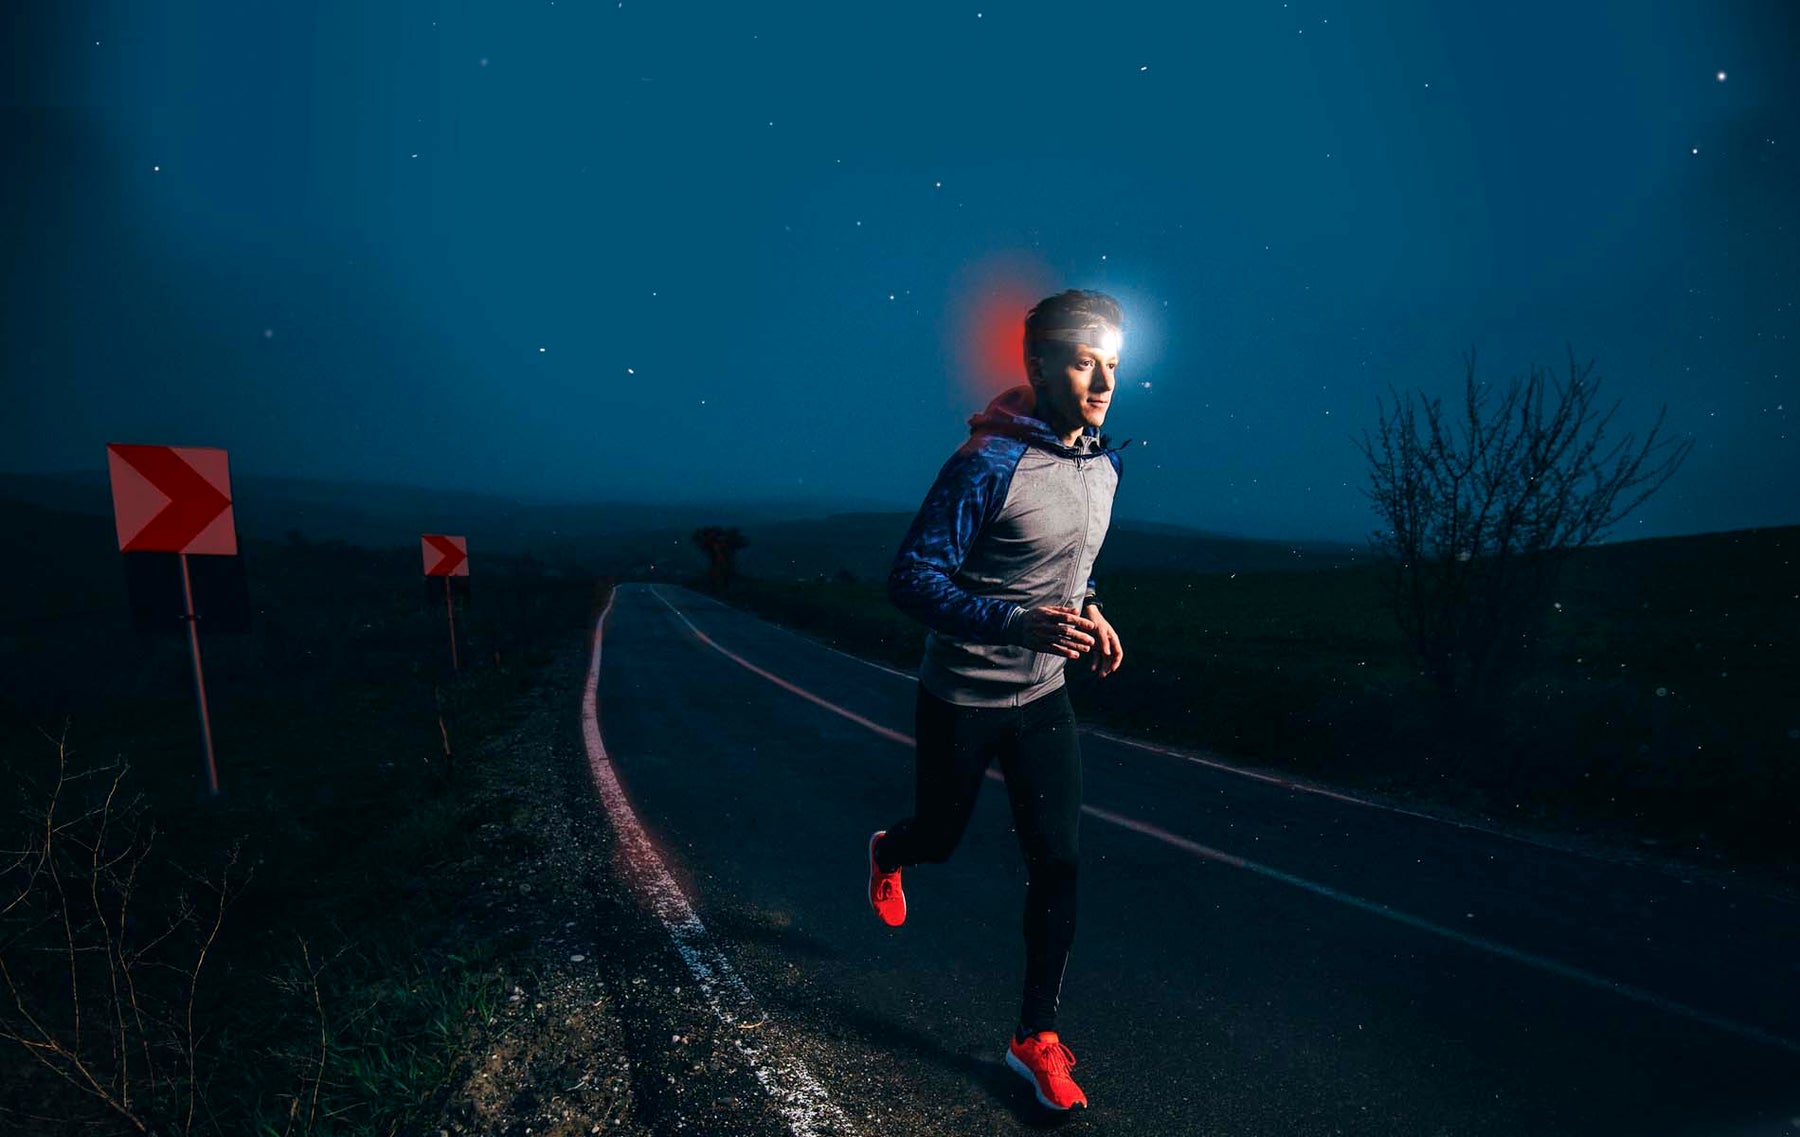 Man running with the NiteRider Road Runner 320 headlamp.  This light is the best camping, running, trail, overlanding, overland headlamp.  At 320 lumens it fits in the best range of lumens for a useful night light.